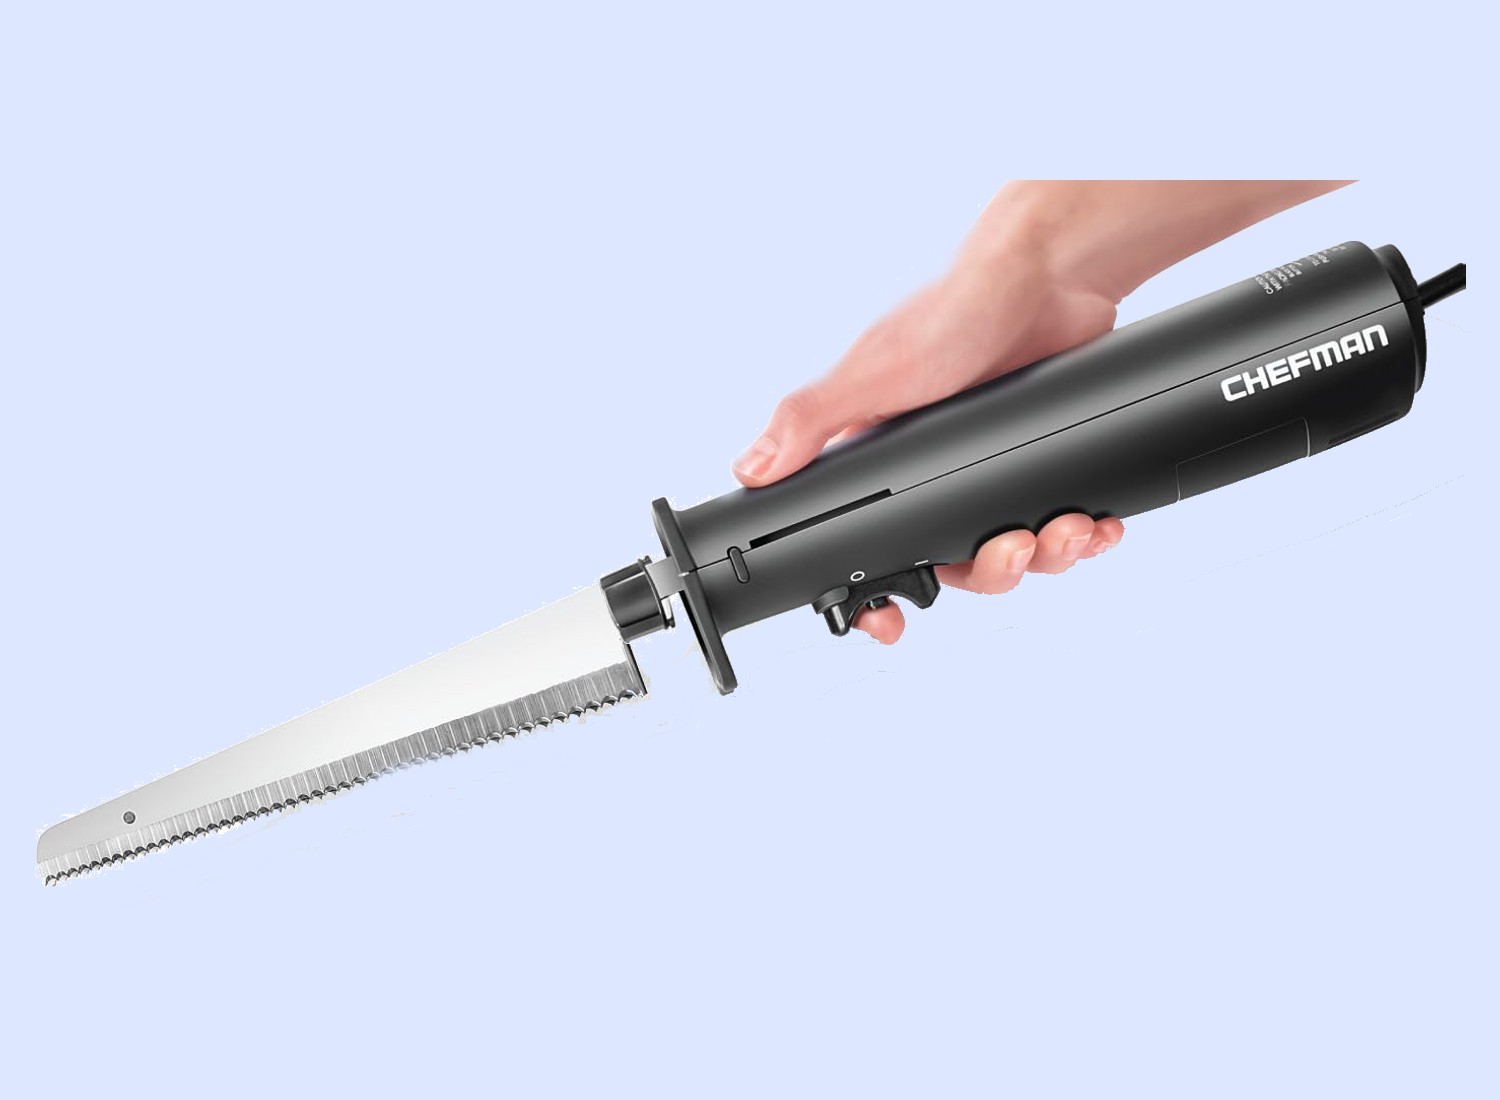  Cuisinart Electric Knife: Electric Knives: Home & Kitchen